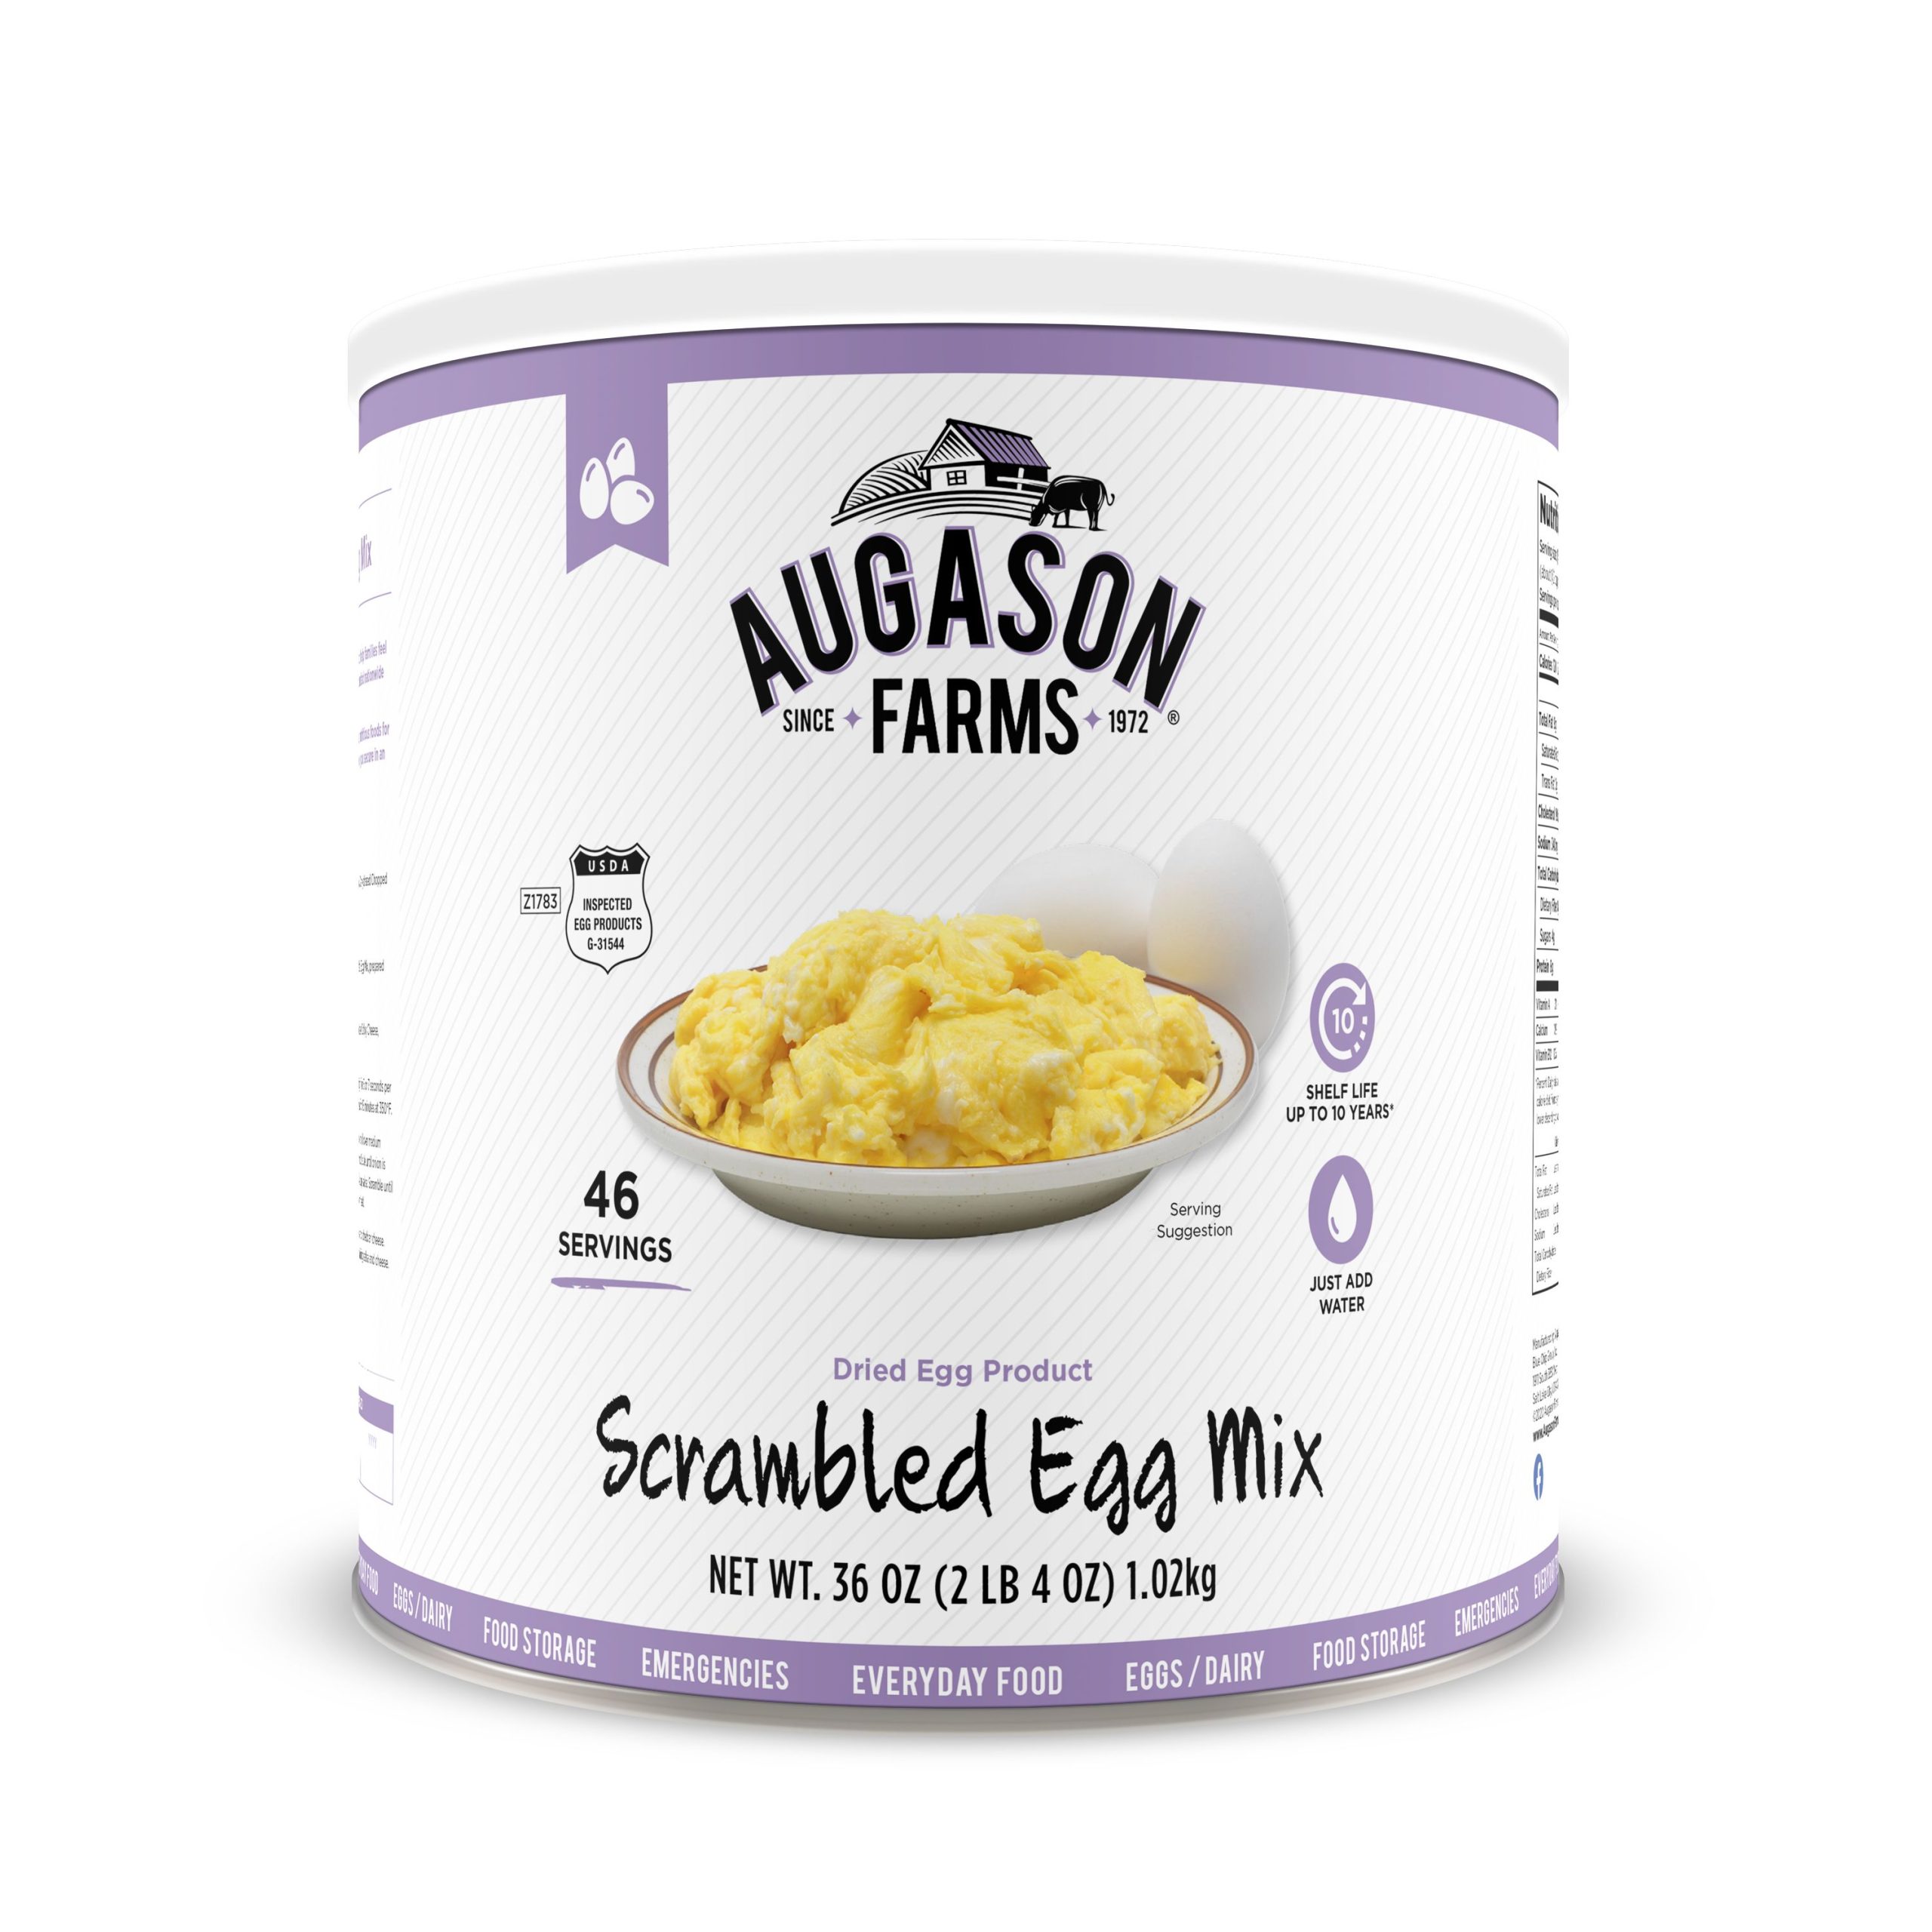 The sentence: *Augason Farms Scrambled Egg Mix 36oz #10 Can Gluten-Free #10 Can - 46 Servings - (SHIPS IN 1-2 WEEKS).